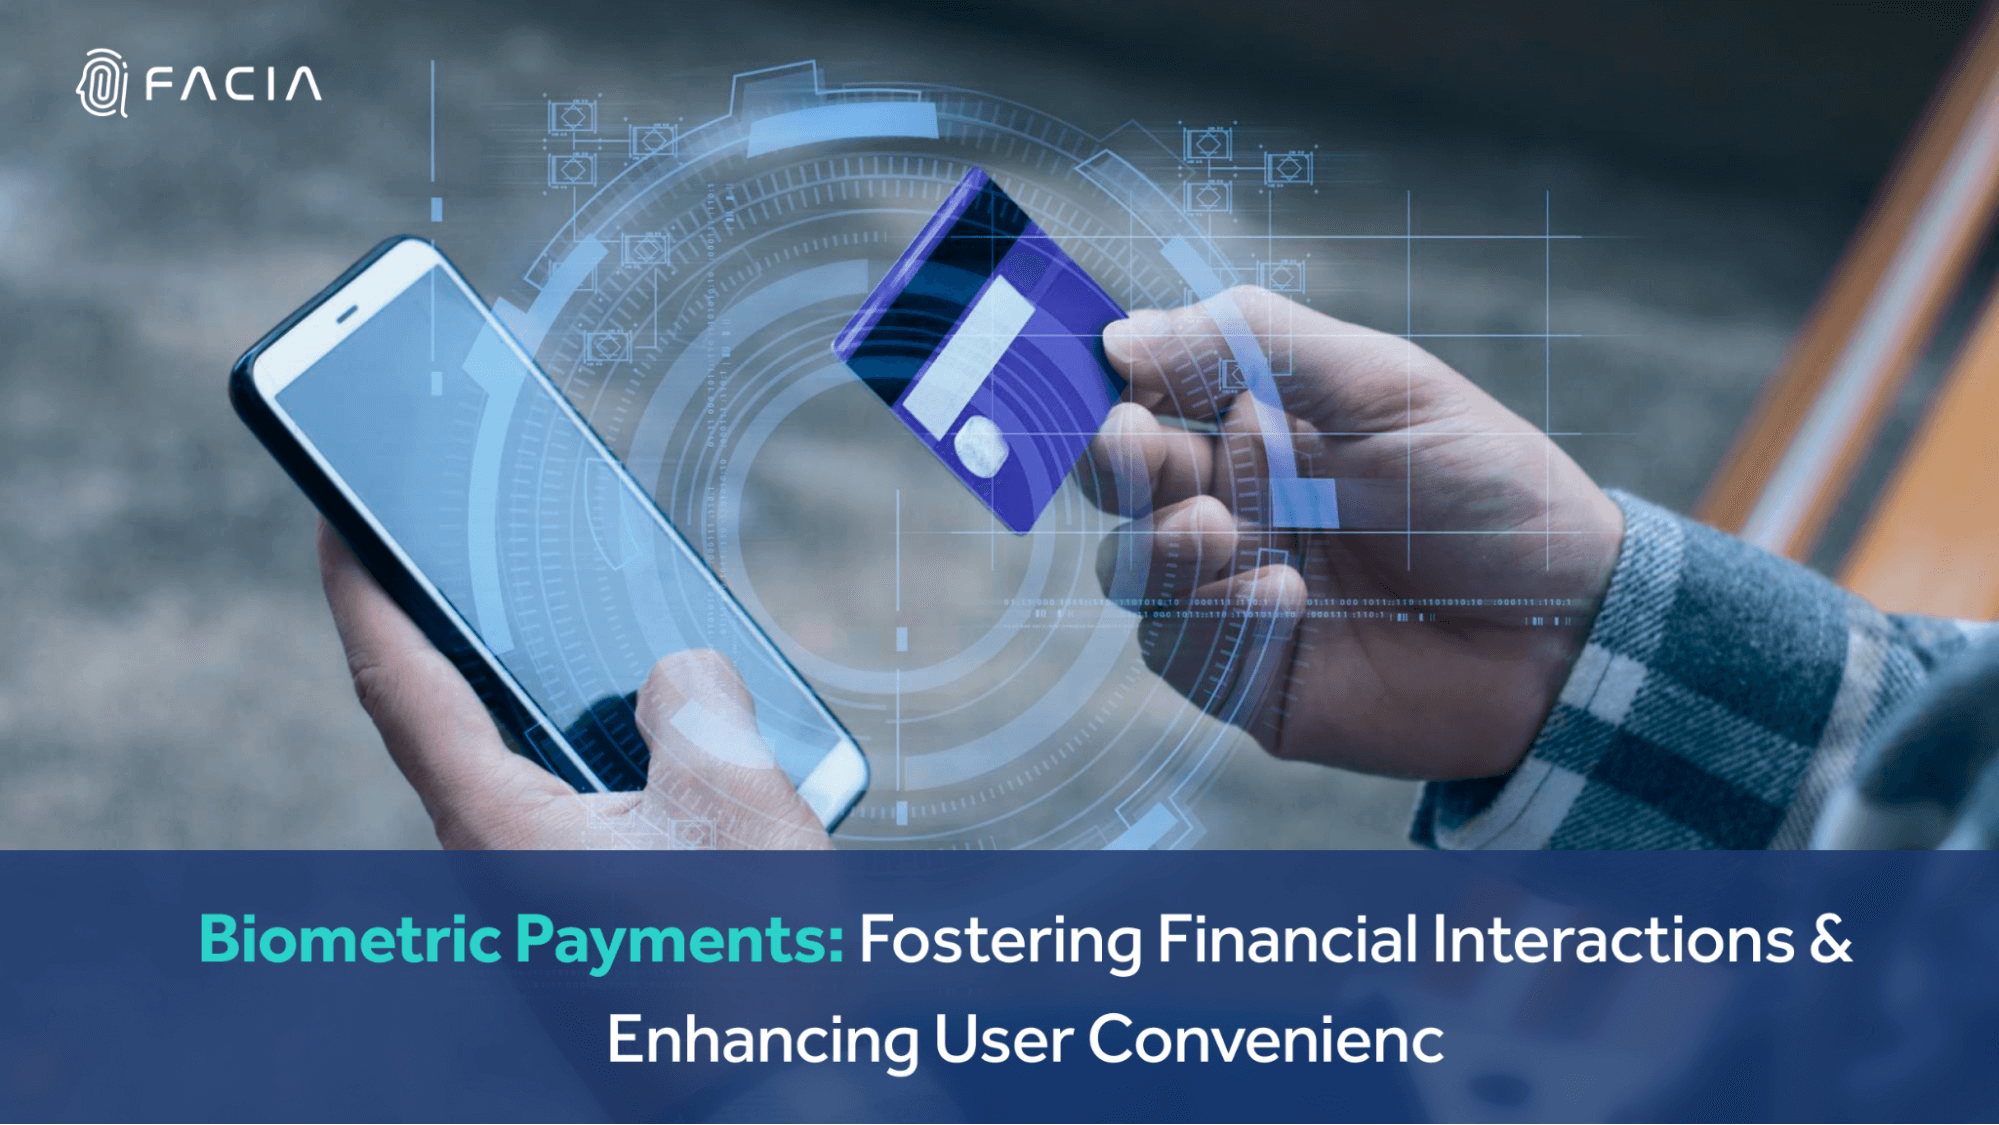 Biometric Payments: Fostering Financial Interactions & Enhancing User Convenience